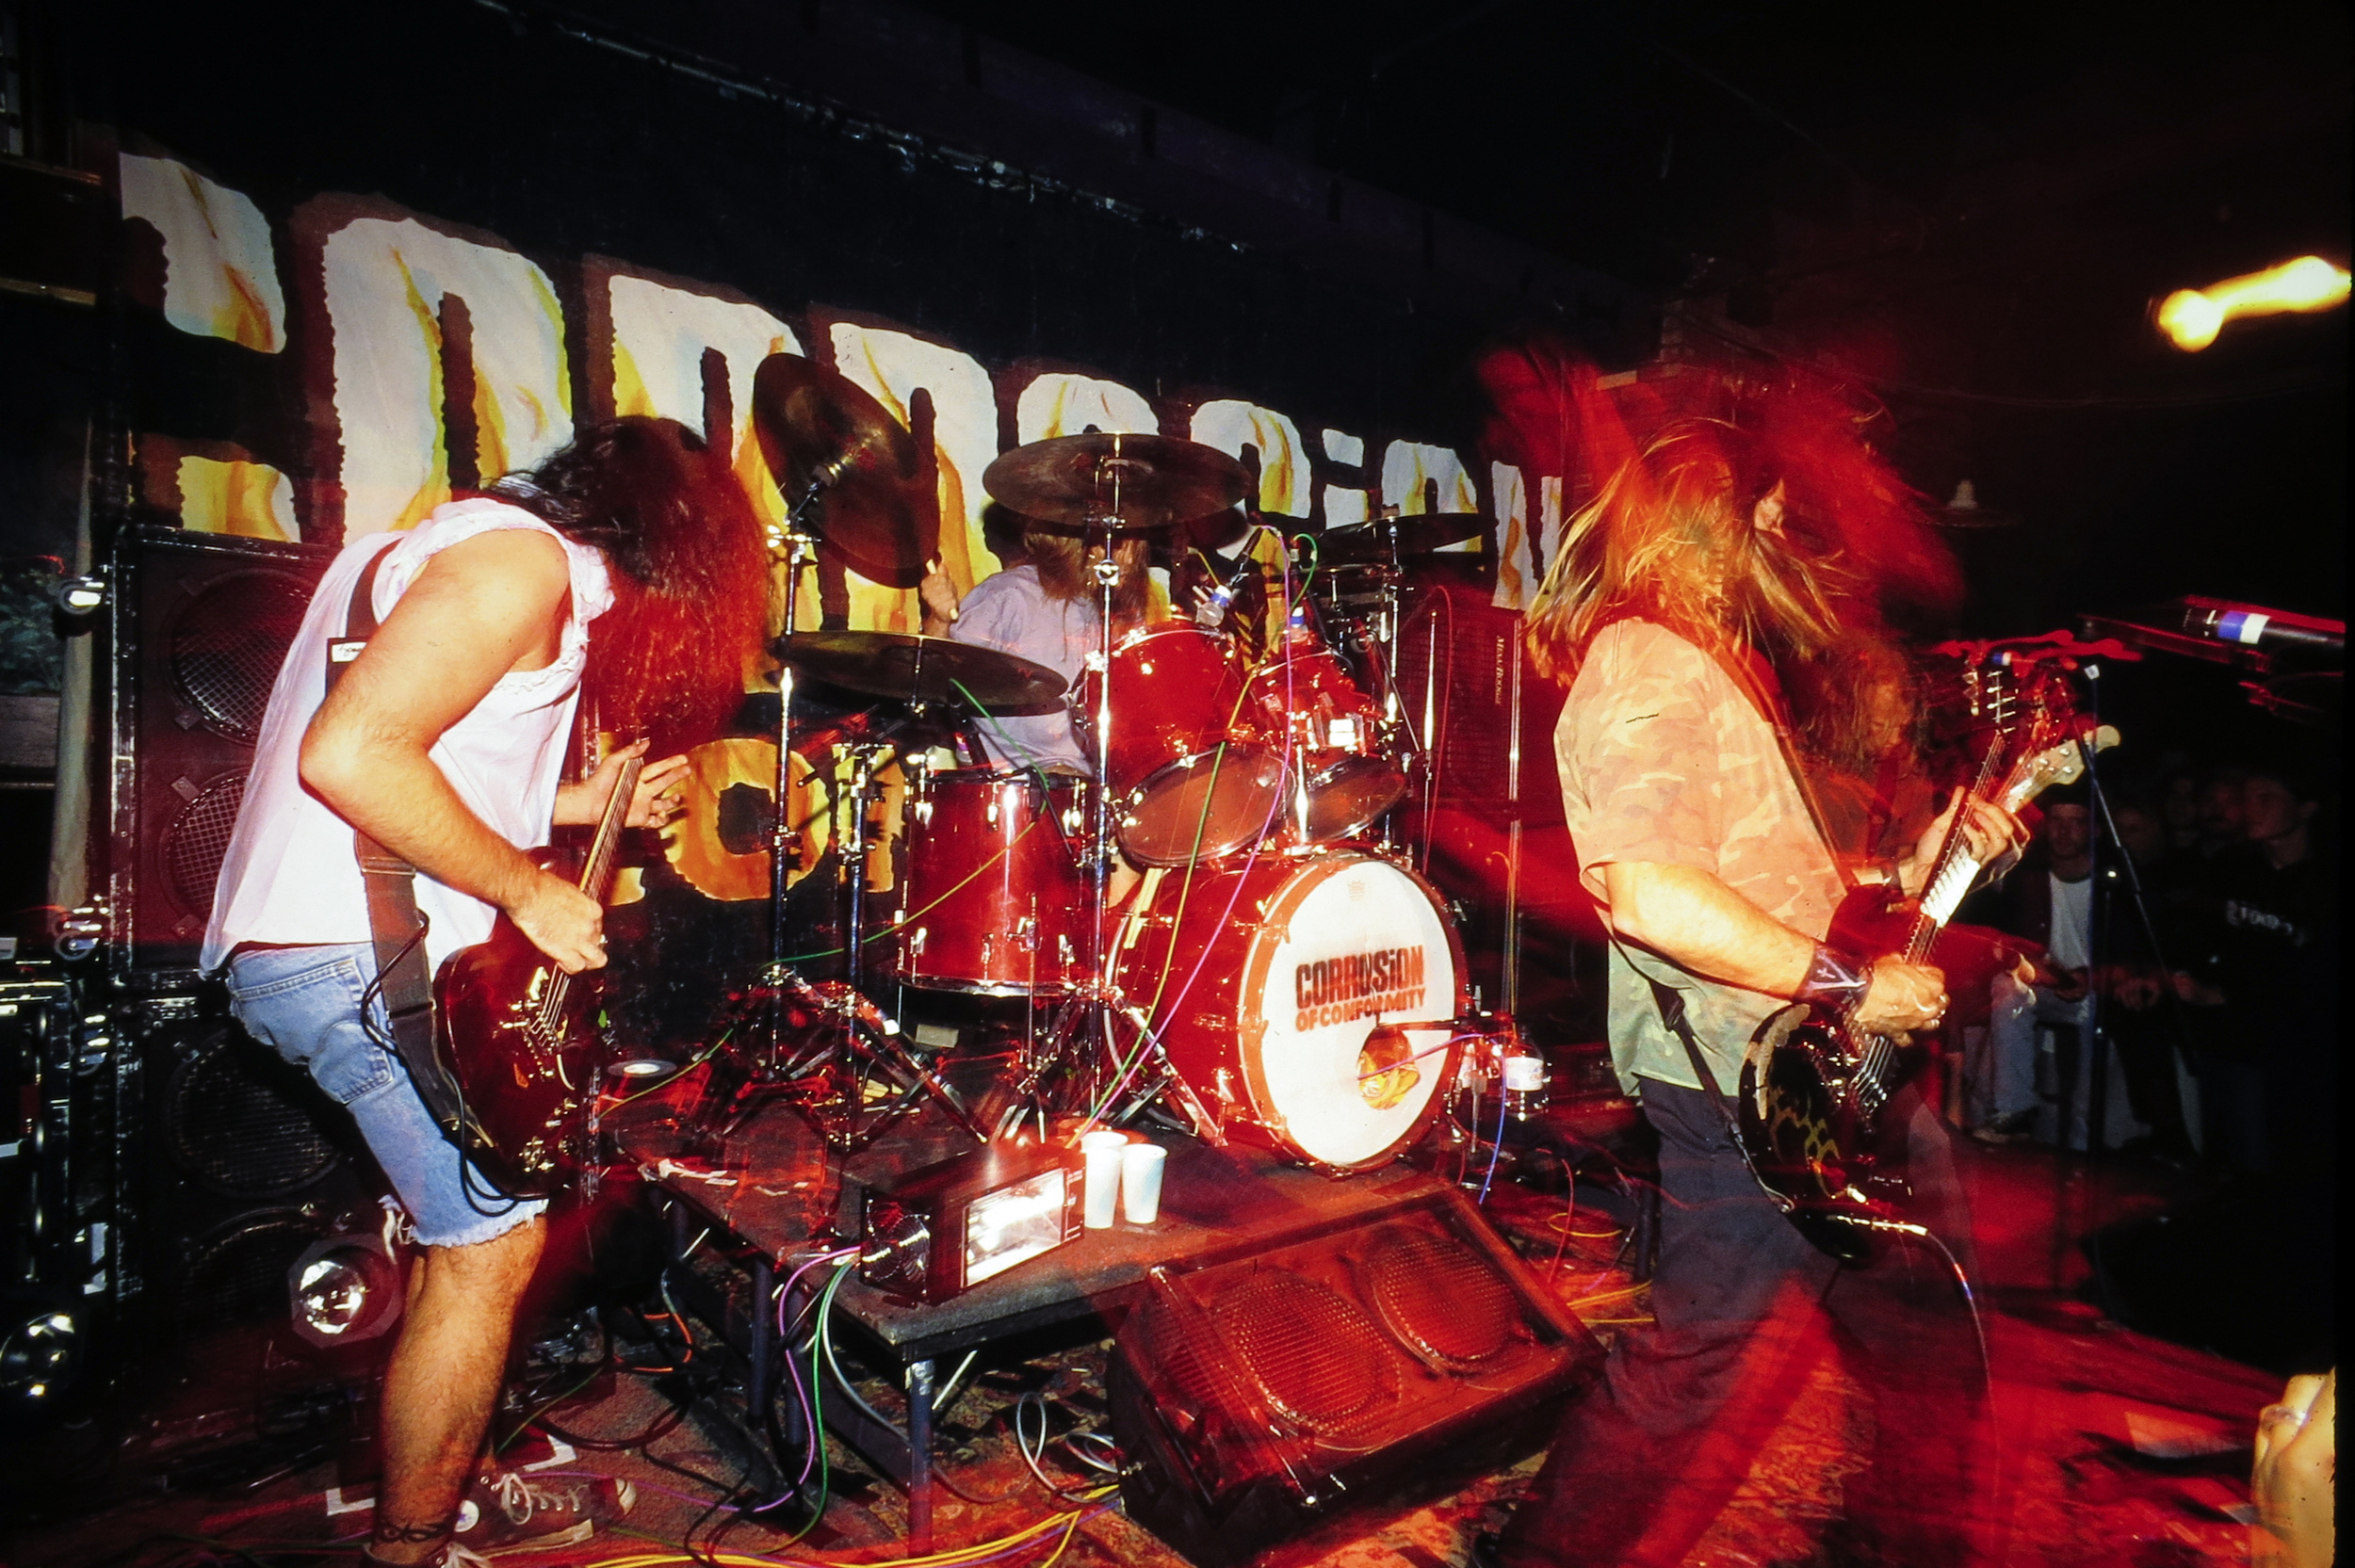 <p>North Carolina's Corrosion of Conformity began life as a hardcore band, then crossover thrash, then metal, then stoner rock (before it was cool). 1991's <em>Blind</em> started to get them greater attention, but 1994's <em>Deliverance</em> was the major label debut that put them on the map. The album is an amazing slab of Sabbath worship that the band has been trying to replicate ever since.</p><p>You may also like: <a href='https://www.yardbarker.com/entertainment/articles/20_facts_you_might_not_know_about_a_few_good_men_031324/s1__37661147'>20 facts you might not know about 'A Few Good Men'</a></p>